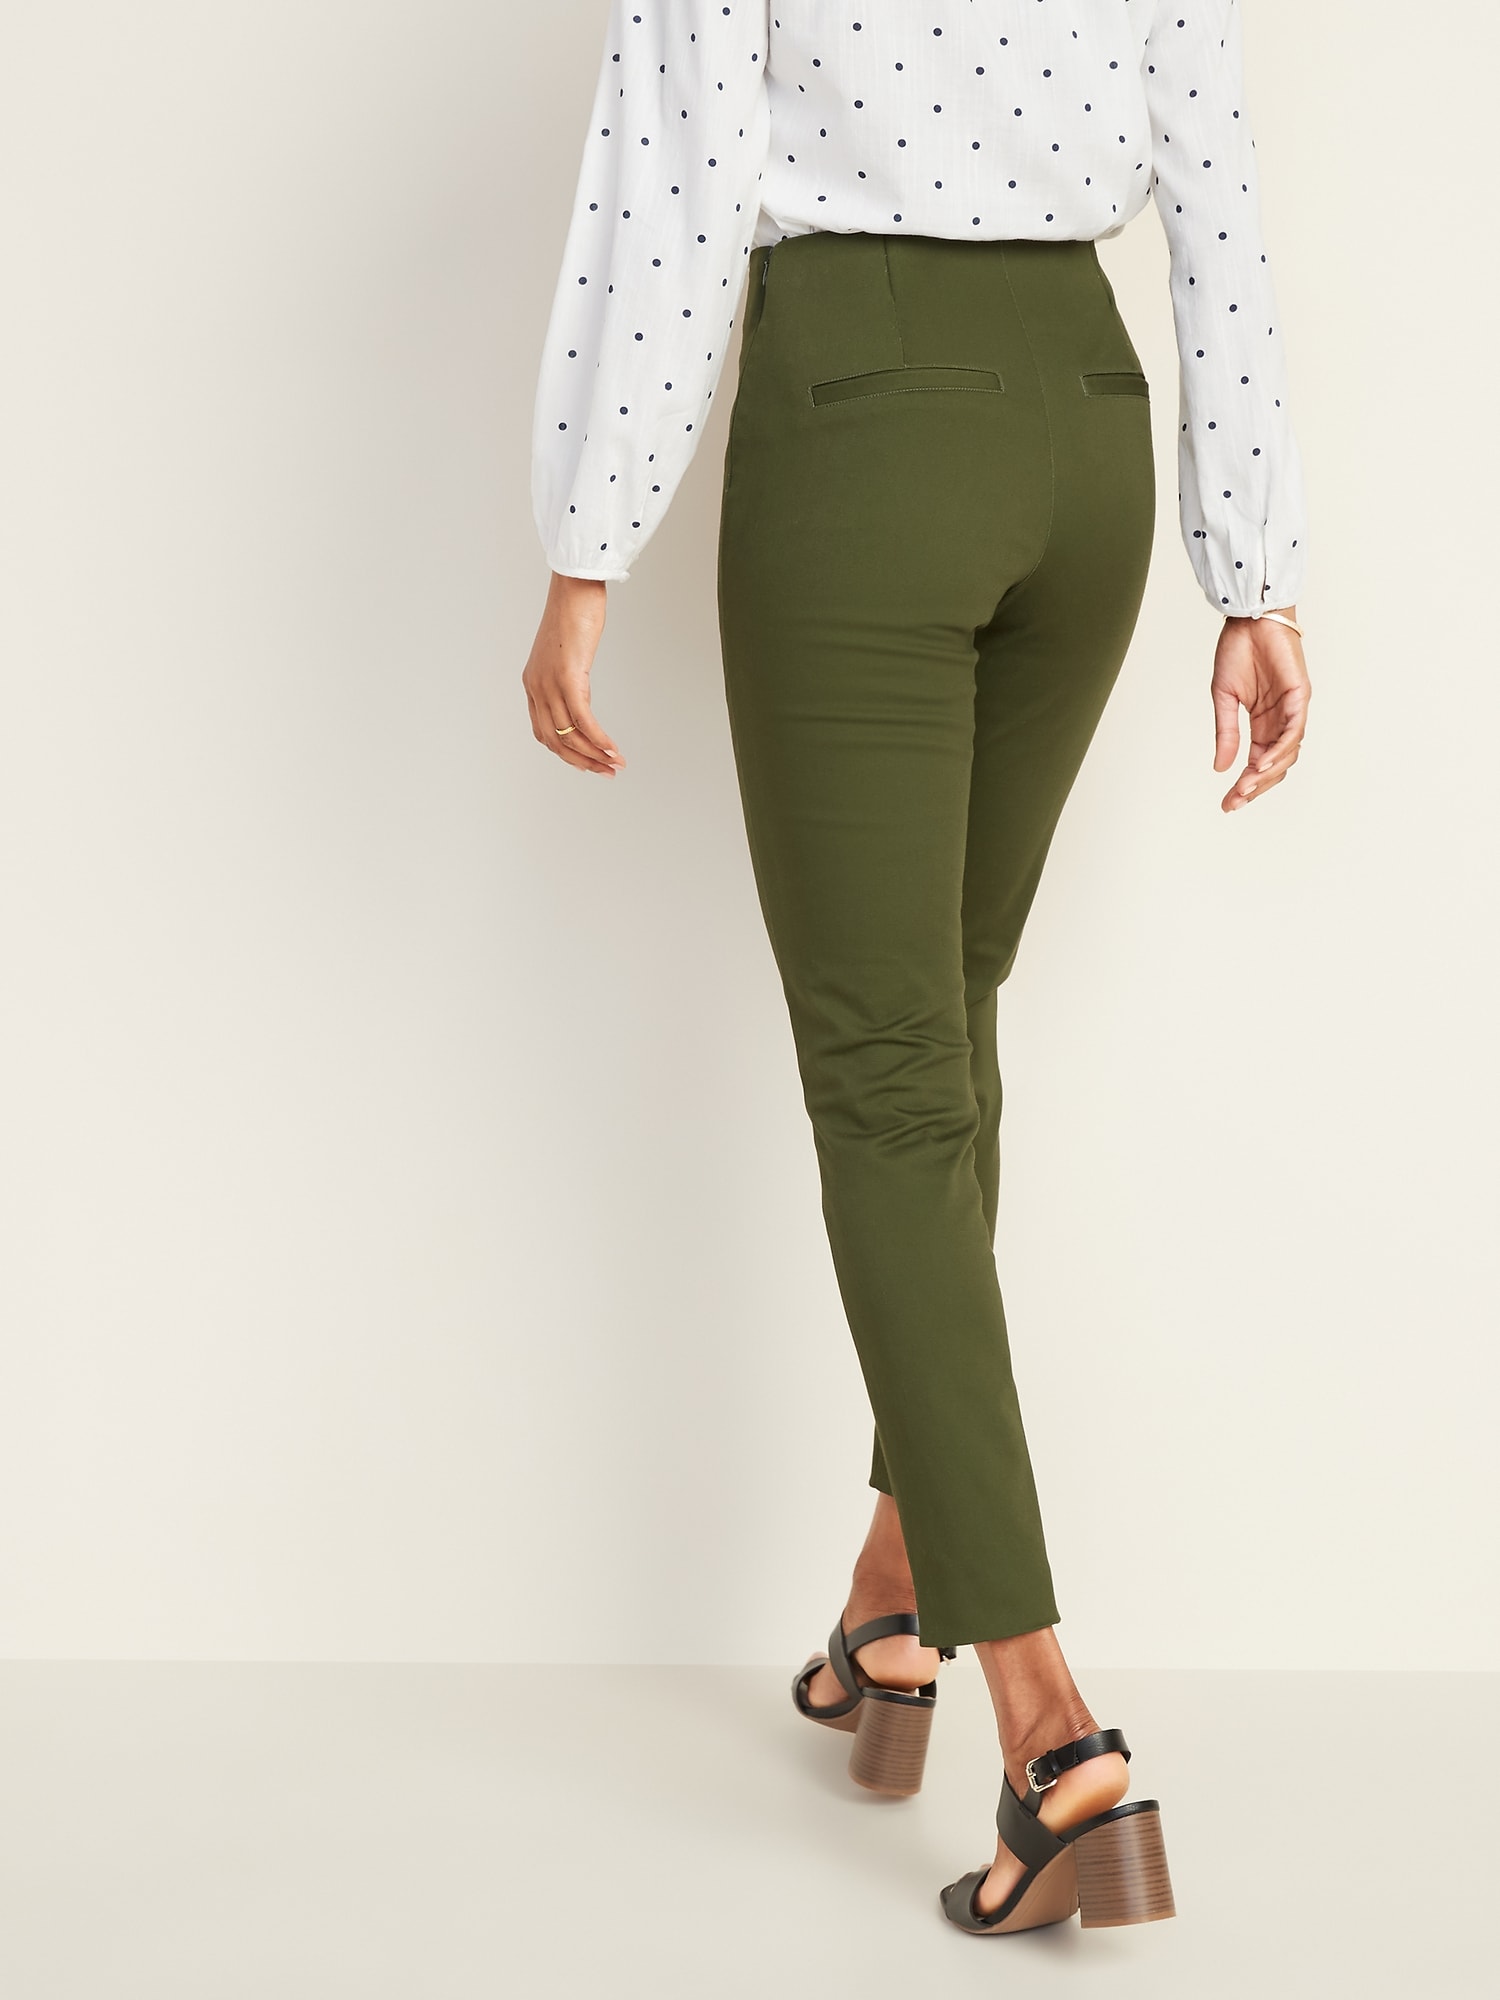 high waisted pants with zipper on the back